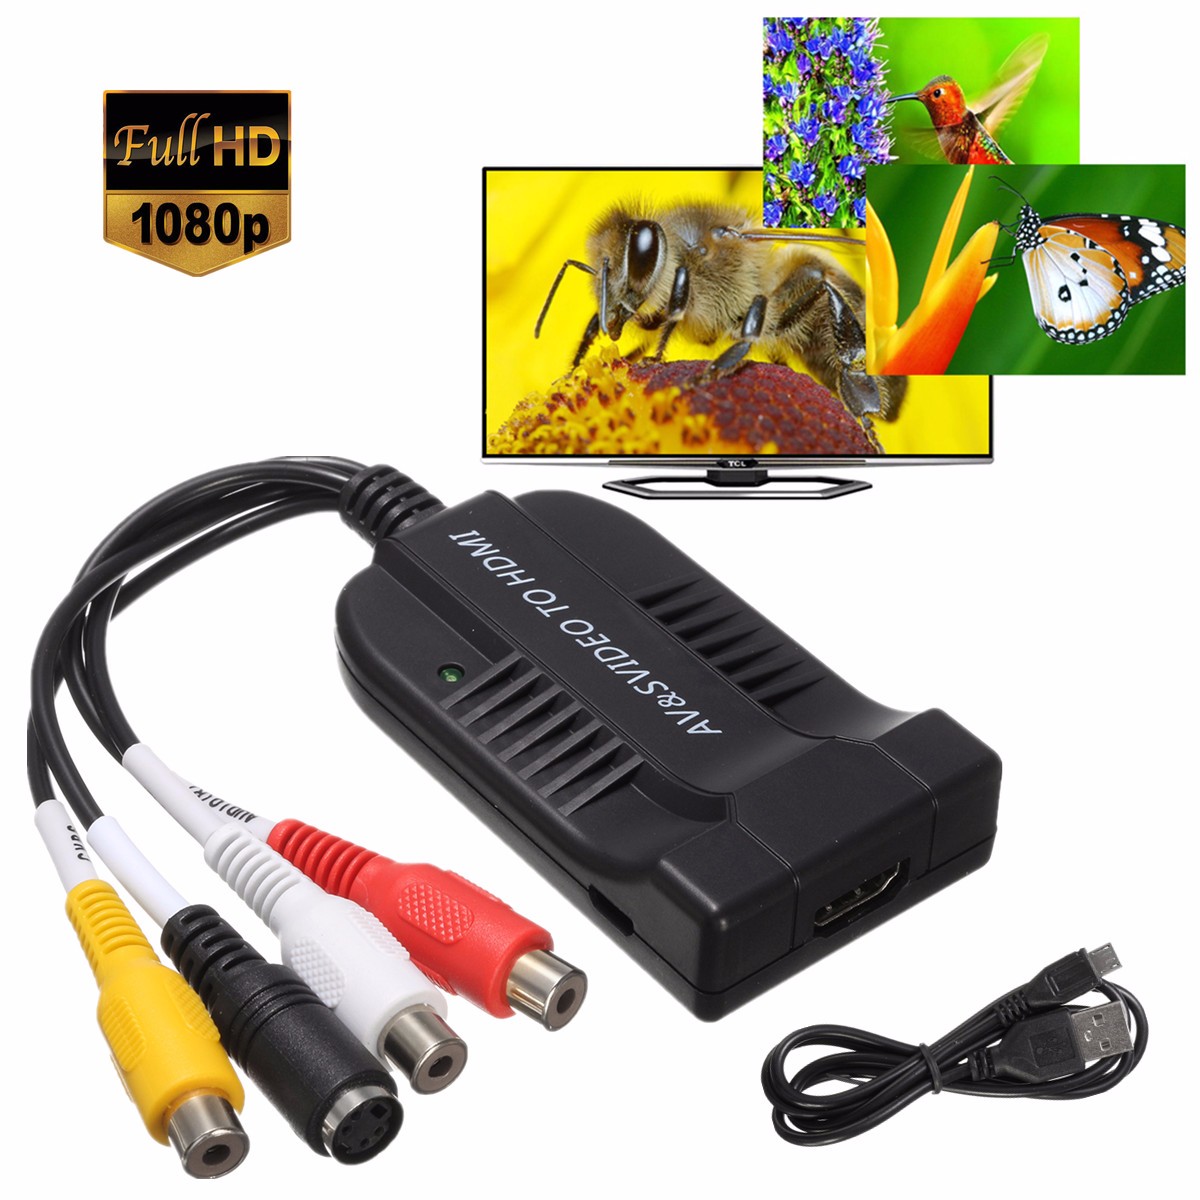 1080P-HD-AV-and-S-Video-To-HDMI-Audio-Adapter-Converter-with-USB-Cable-for-HDTV-DVD-1080611